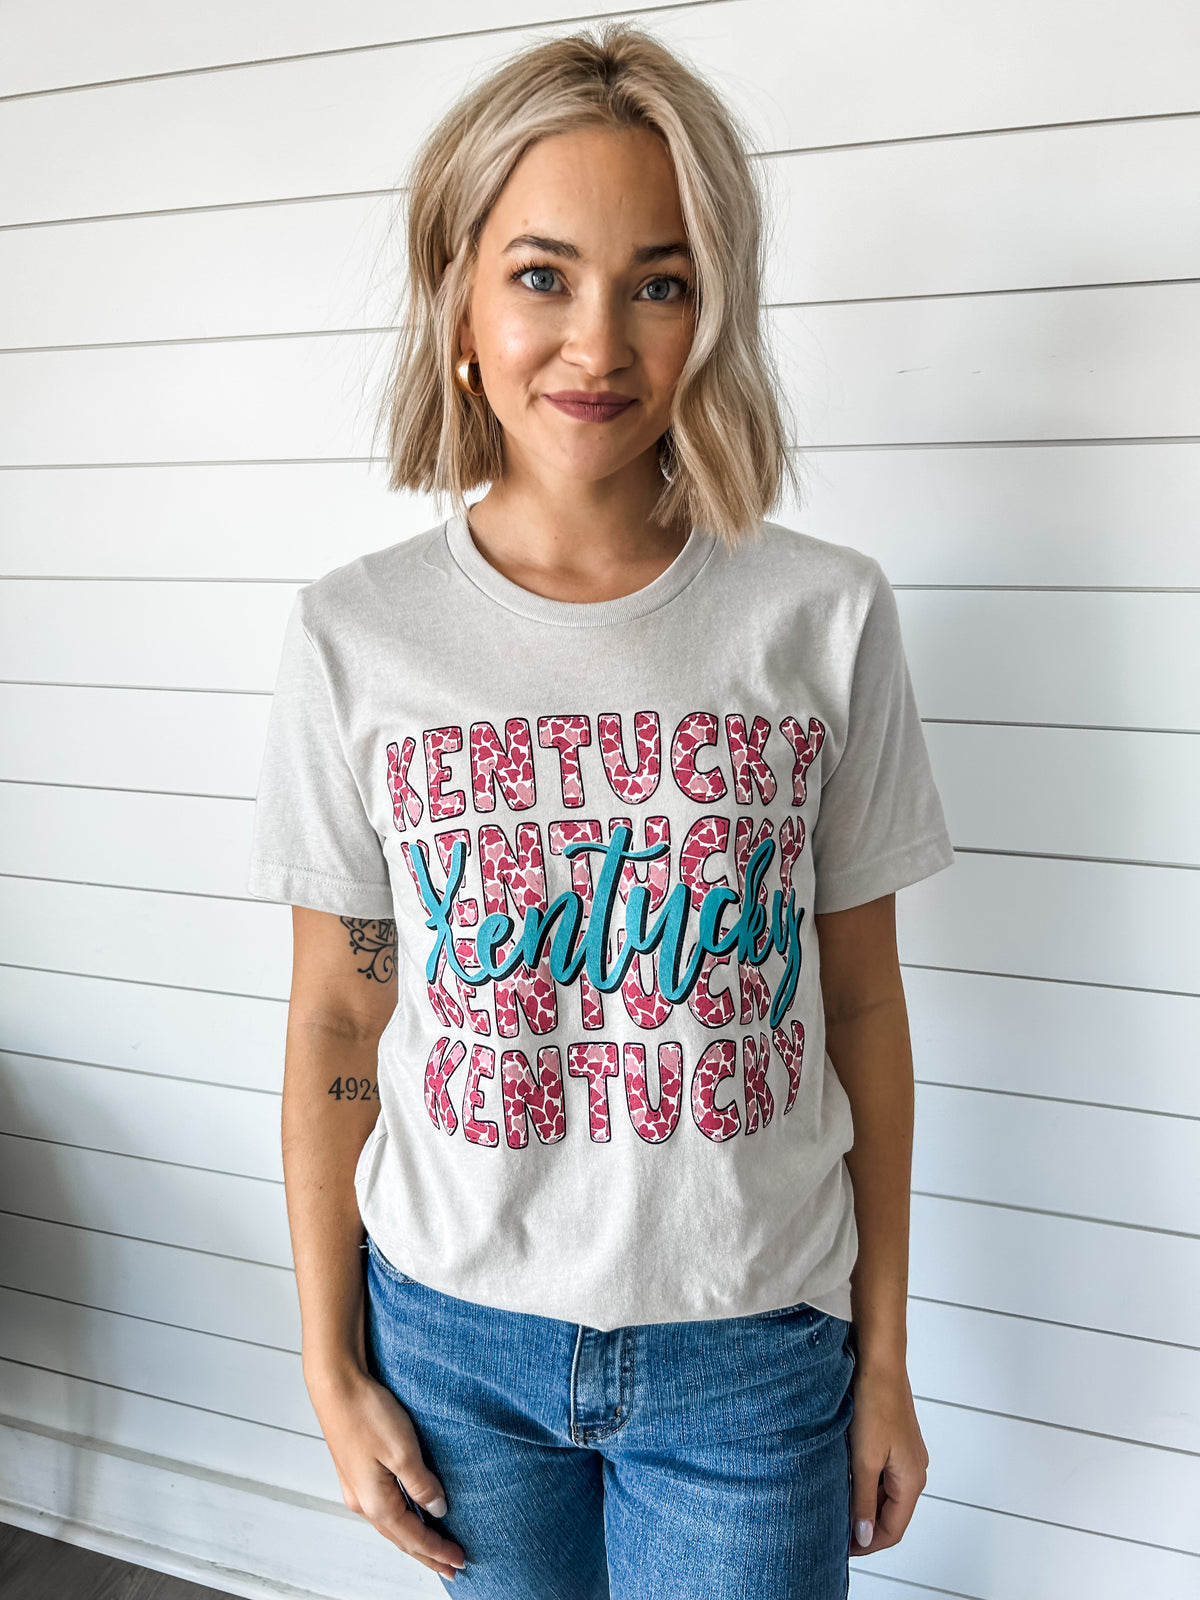 From Kentucky With Love Graphic Tee - FINAL SALE